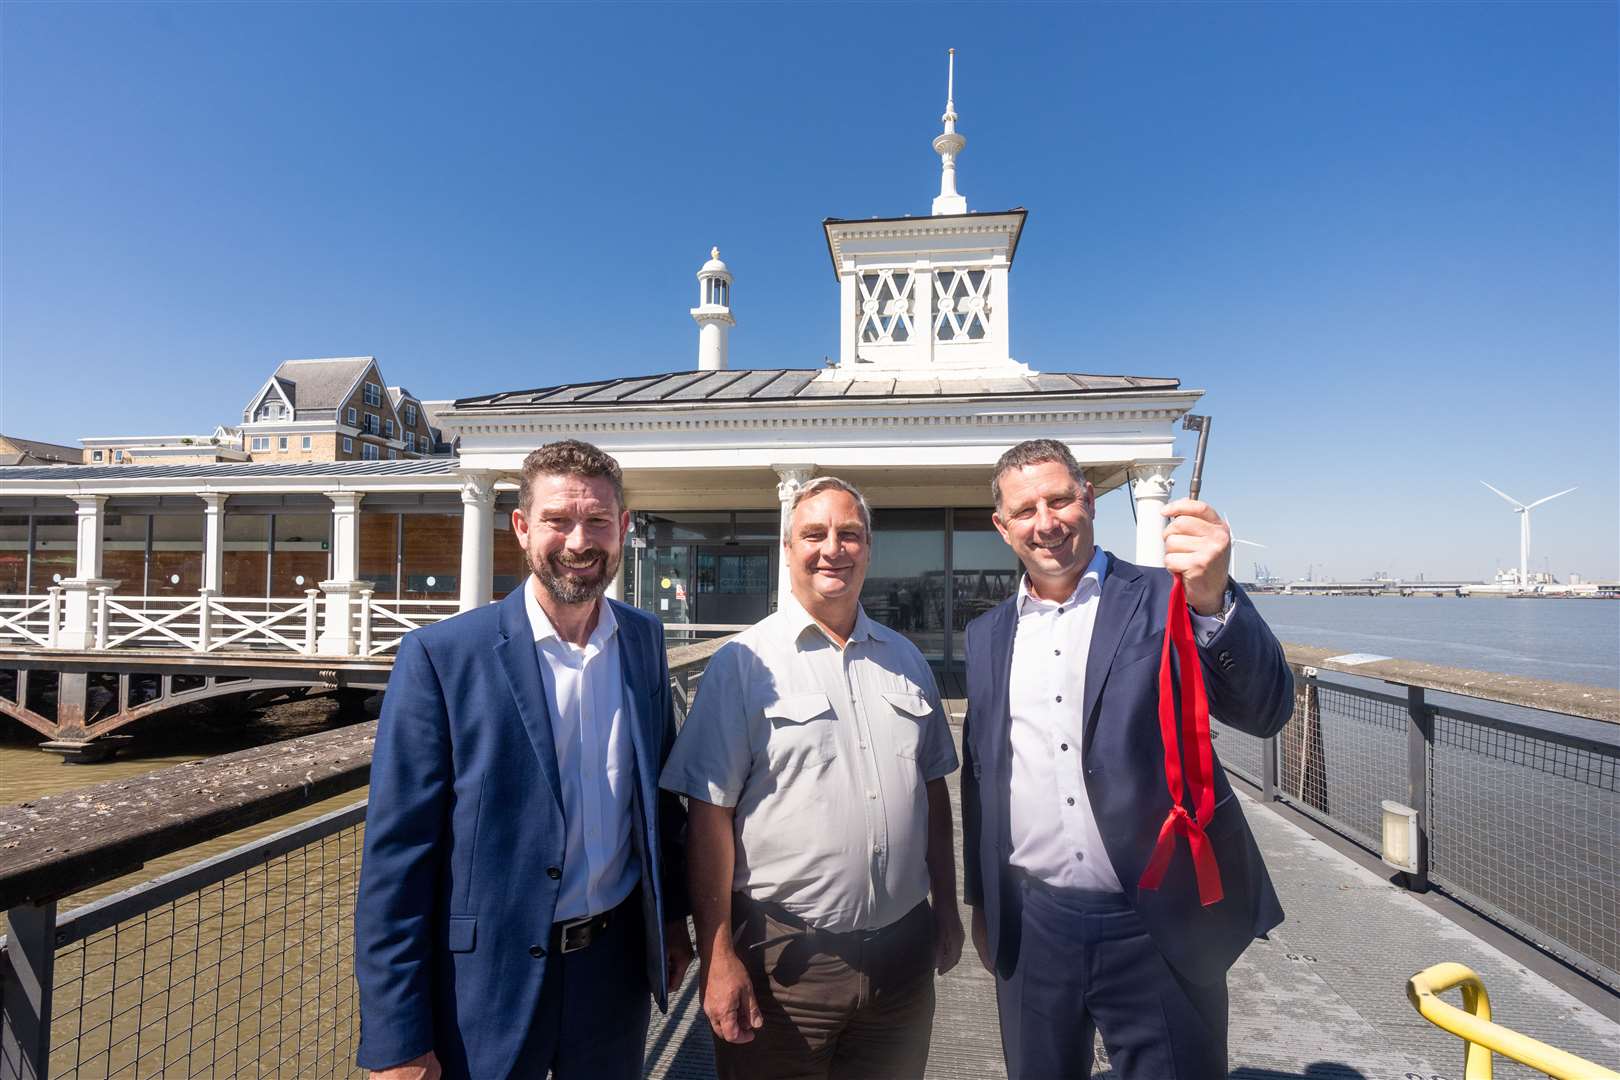 From left: Deputy chief executive Gravesham council Nick Brown, leader of the council Cllr John Burden, and chief executive of Uber Boat Sean Collins. Picture: Thames Clippers